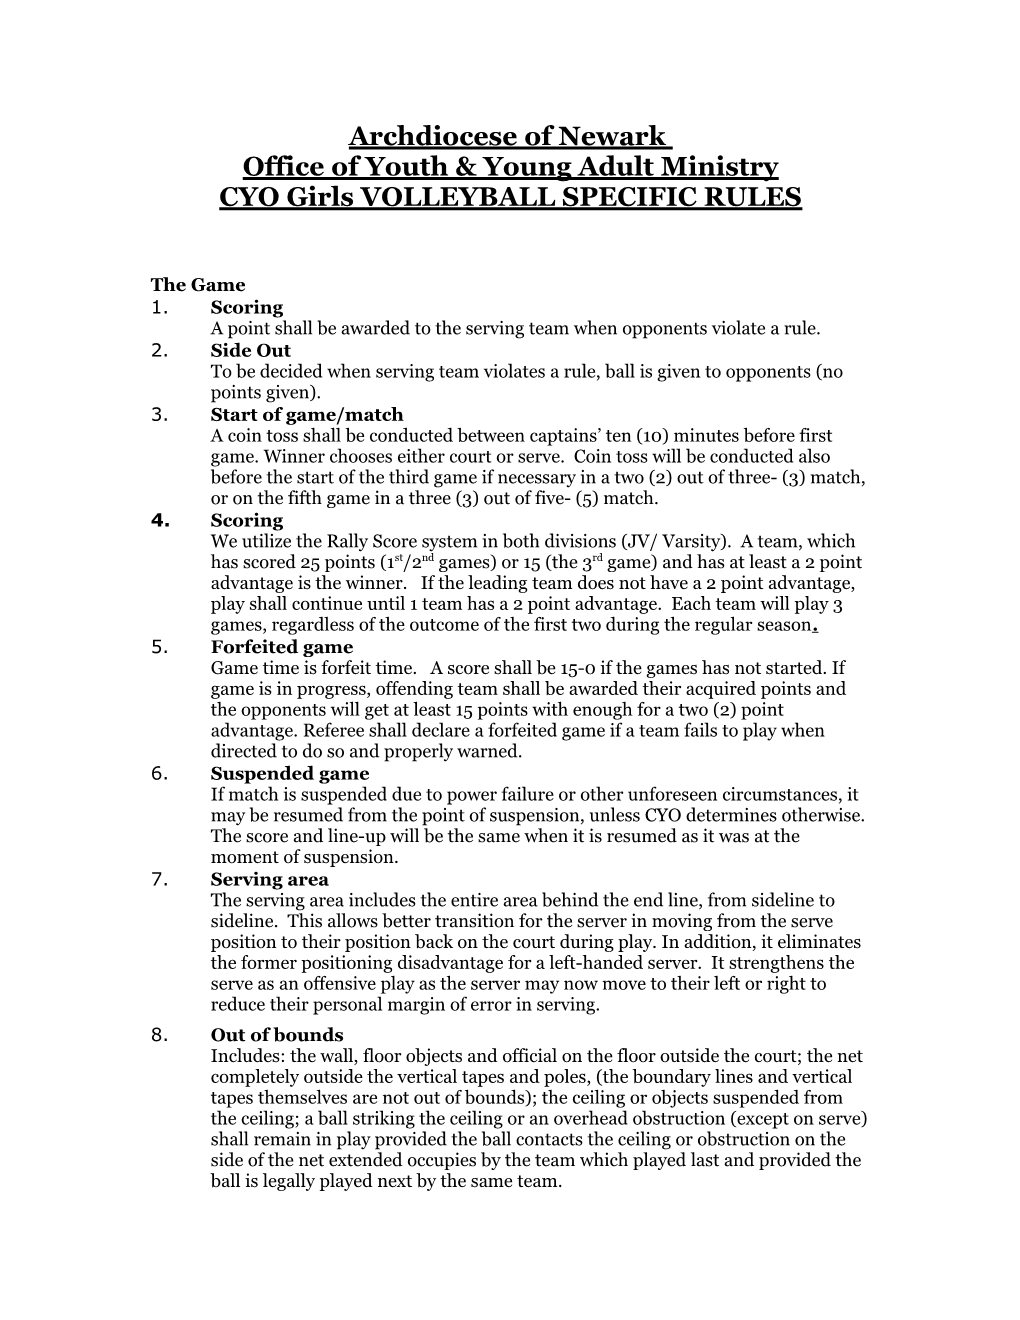 CYO Girls VOLLEYBALL SPECIFIC RULES